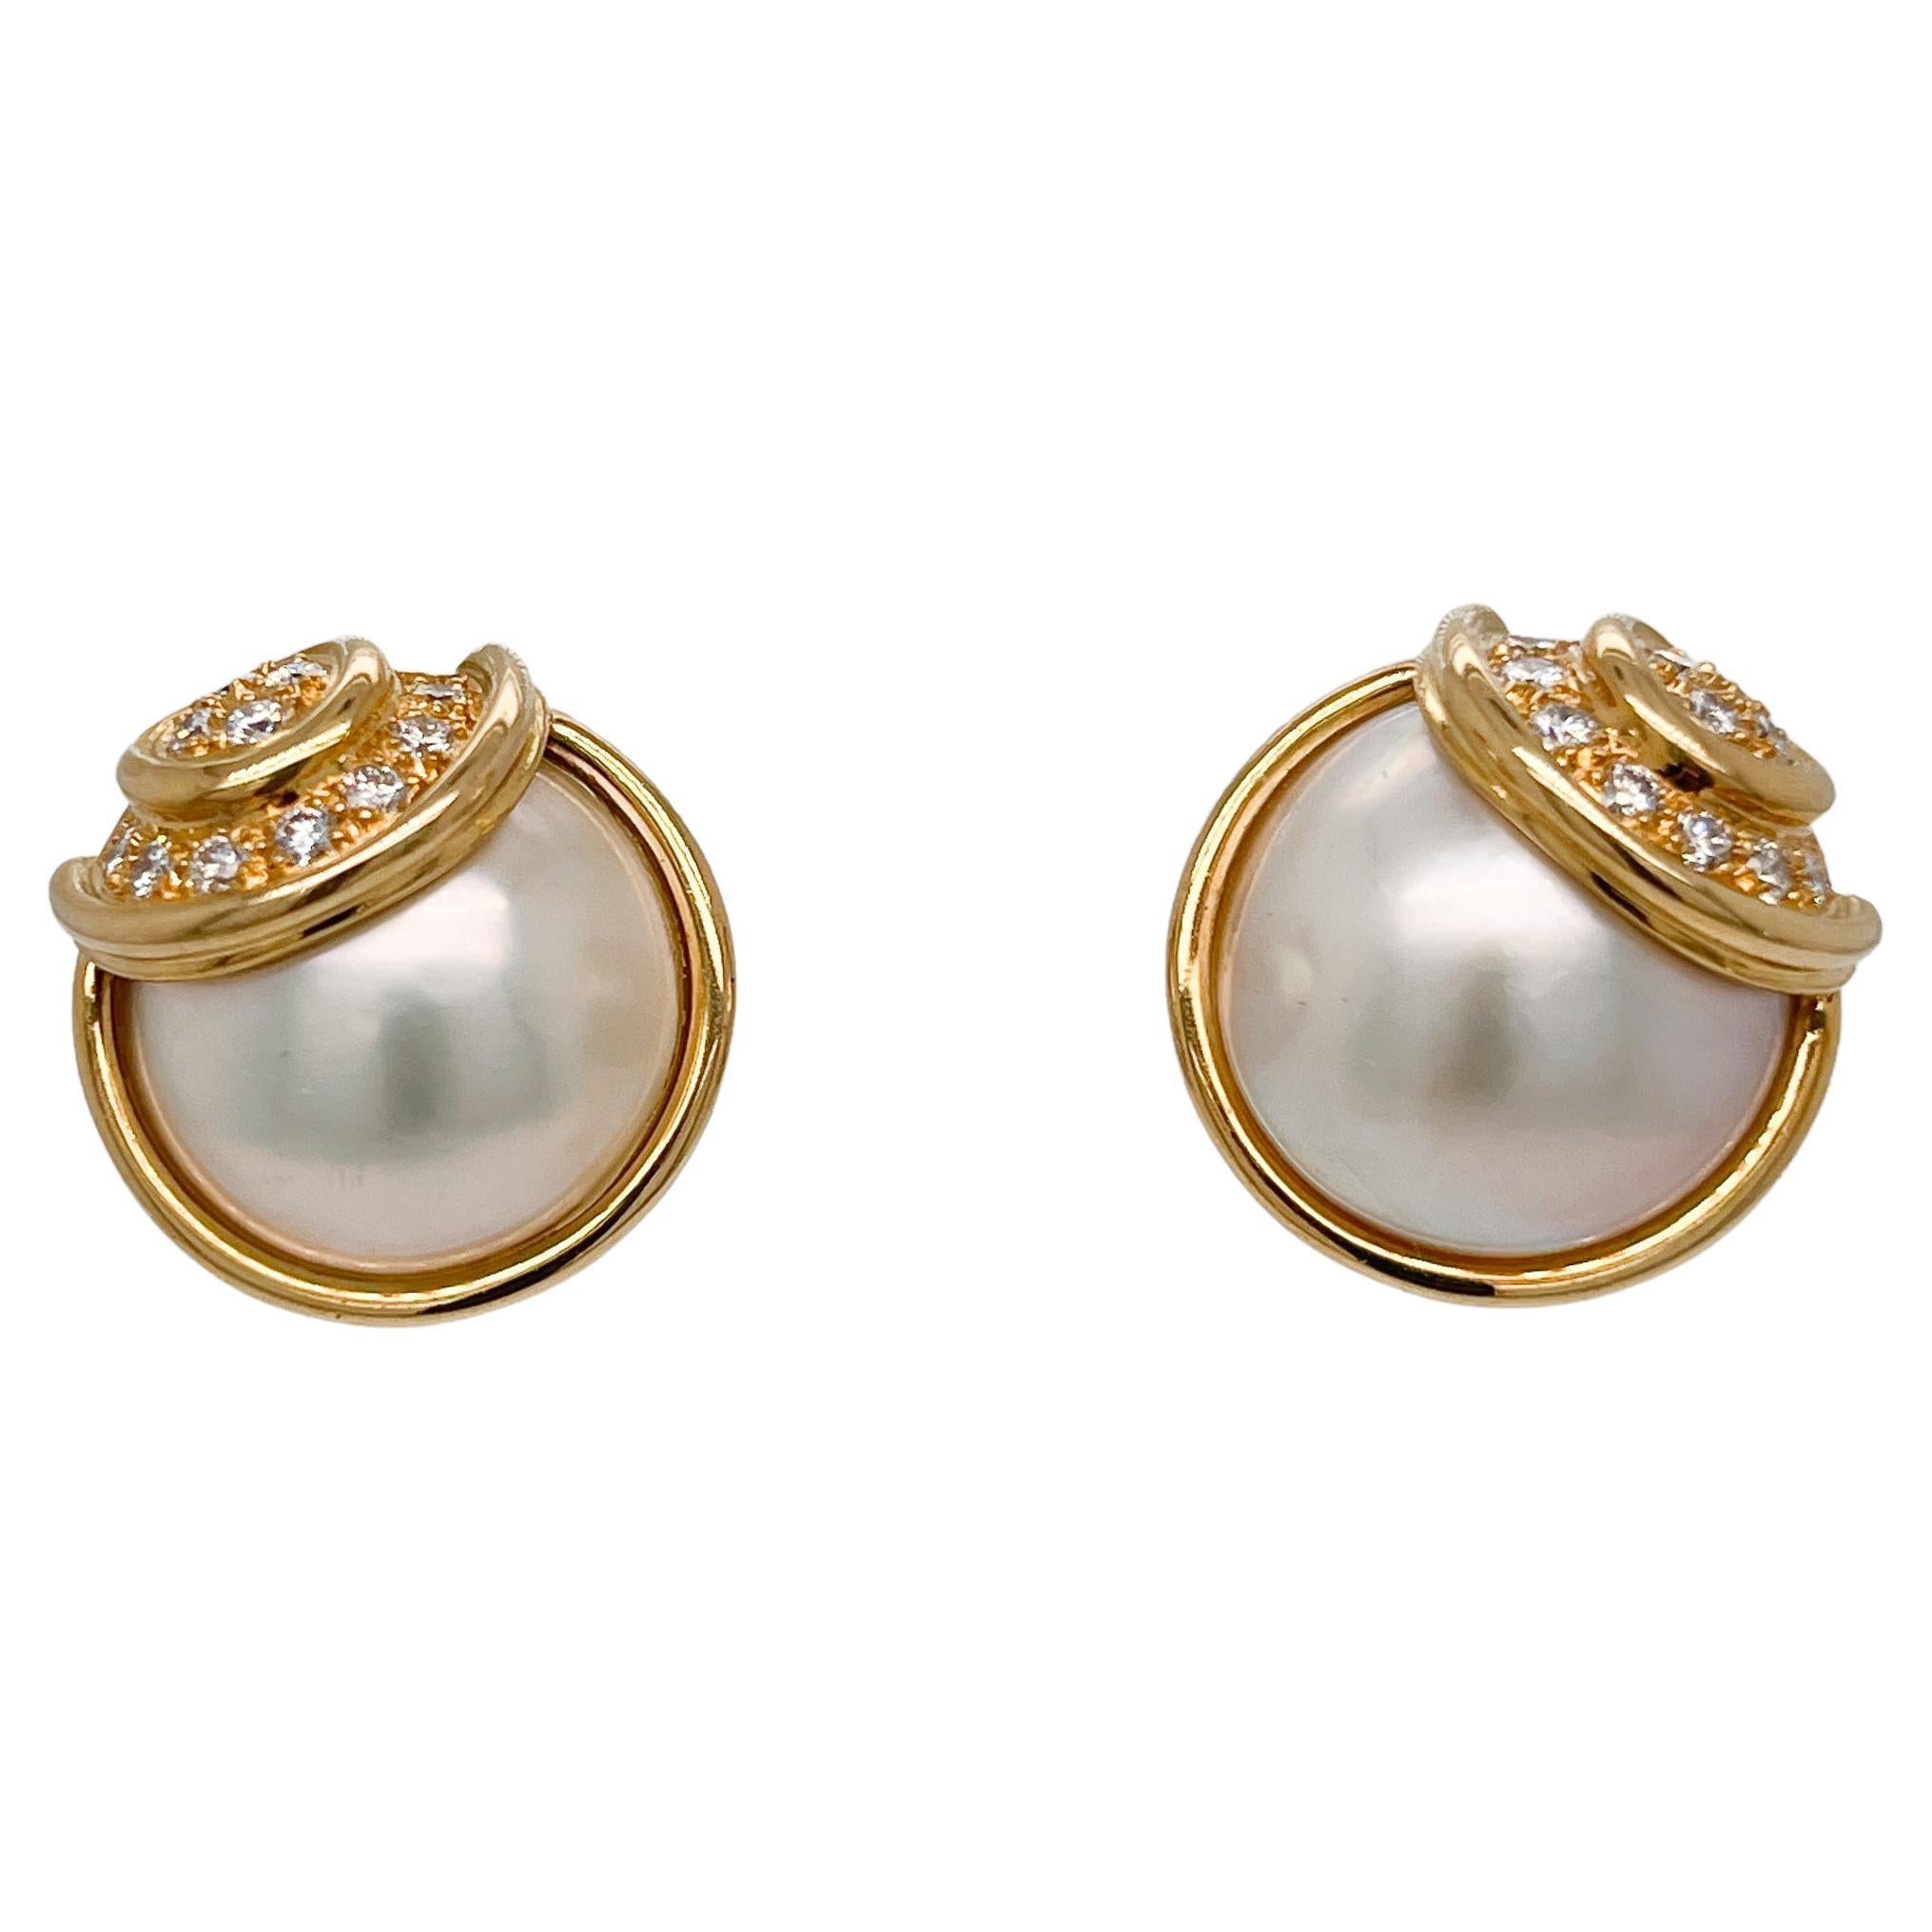 Pair of Signed Gübelin 18K Gold, Diamond & Mabe Pearl Clip-On Earrings For Sale